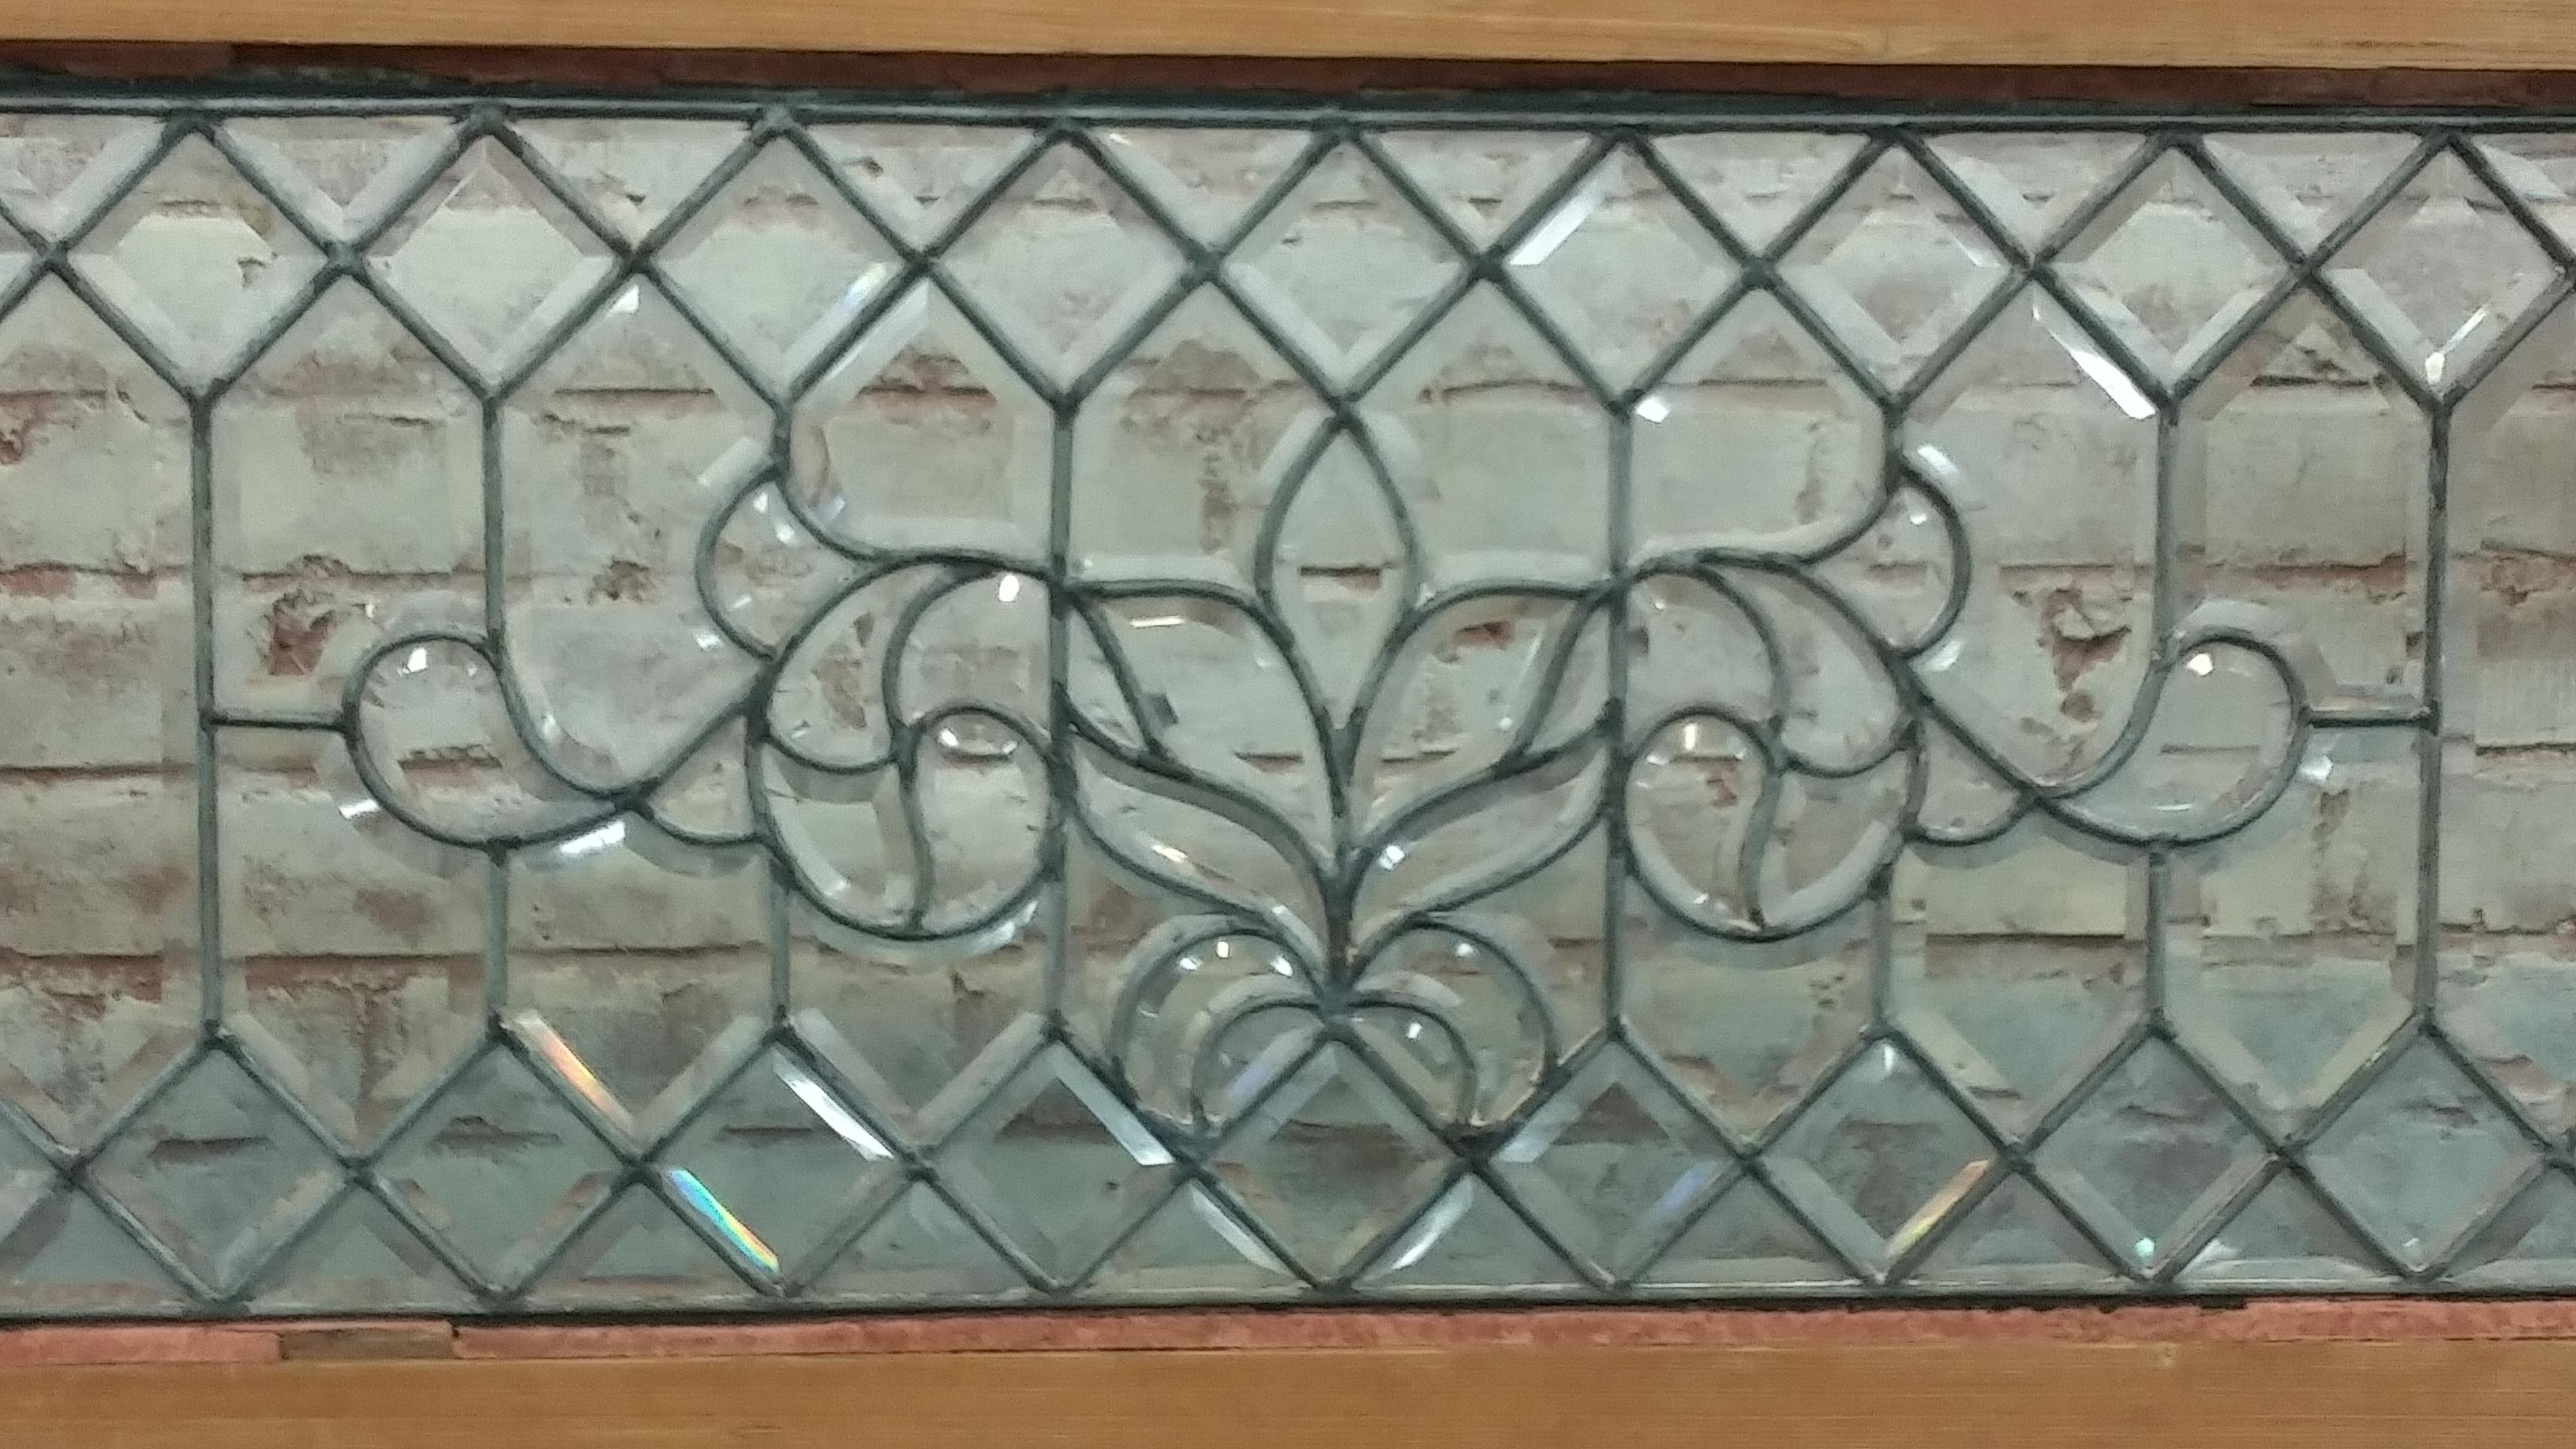 Excellent example of late 19th century craftsmanship. Very good condition with no cracks at all. Detail is really intricate. See all photos for examples of different glass.